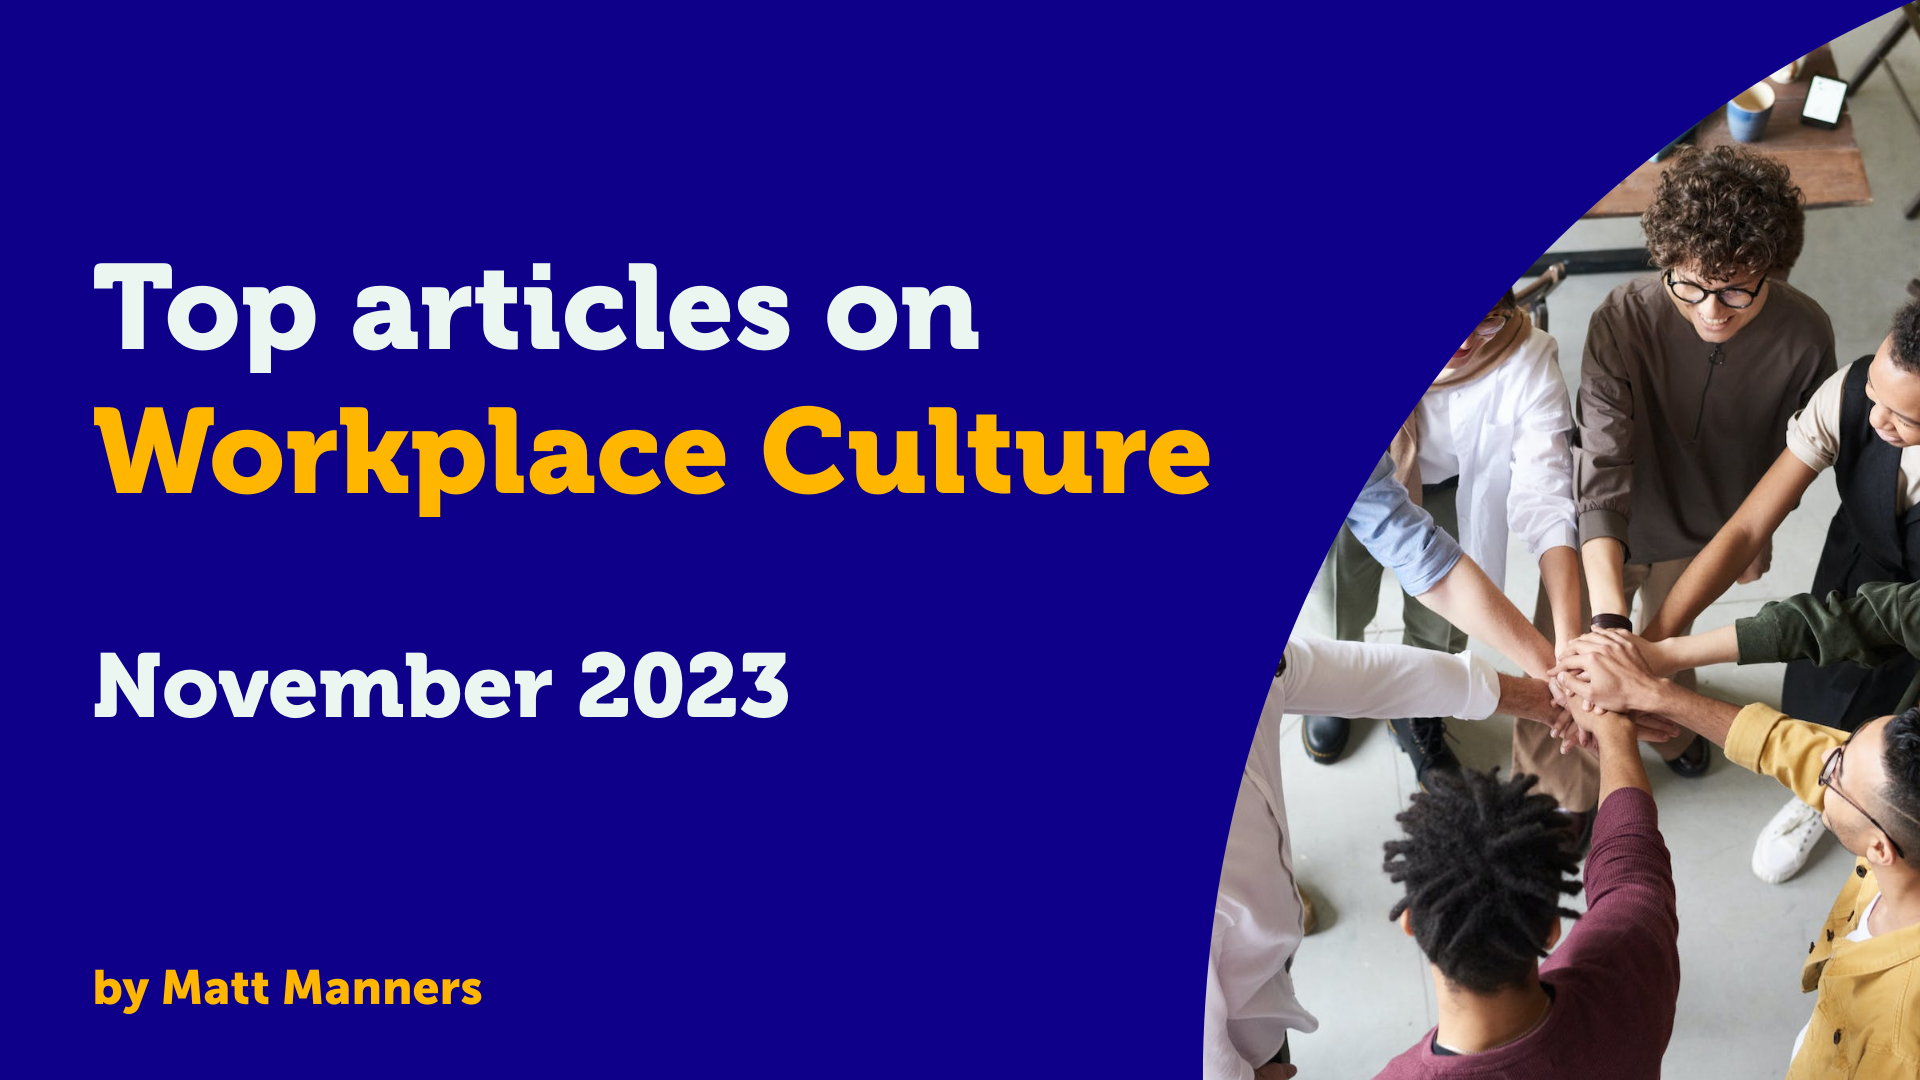 Top Articles on Workplace Culture in November 2023